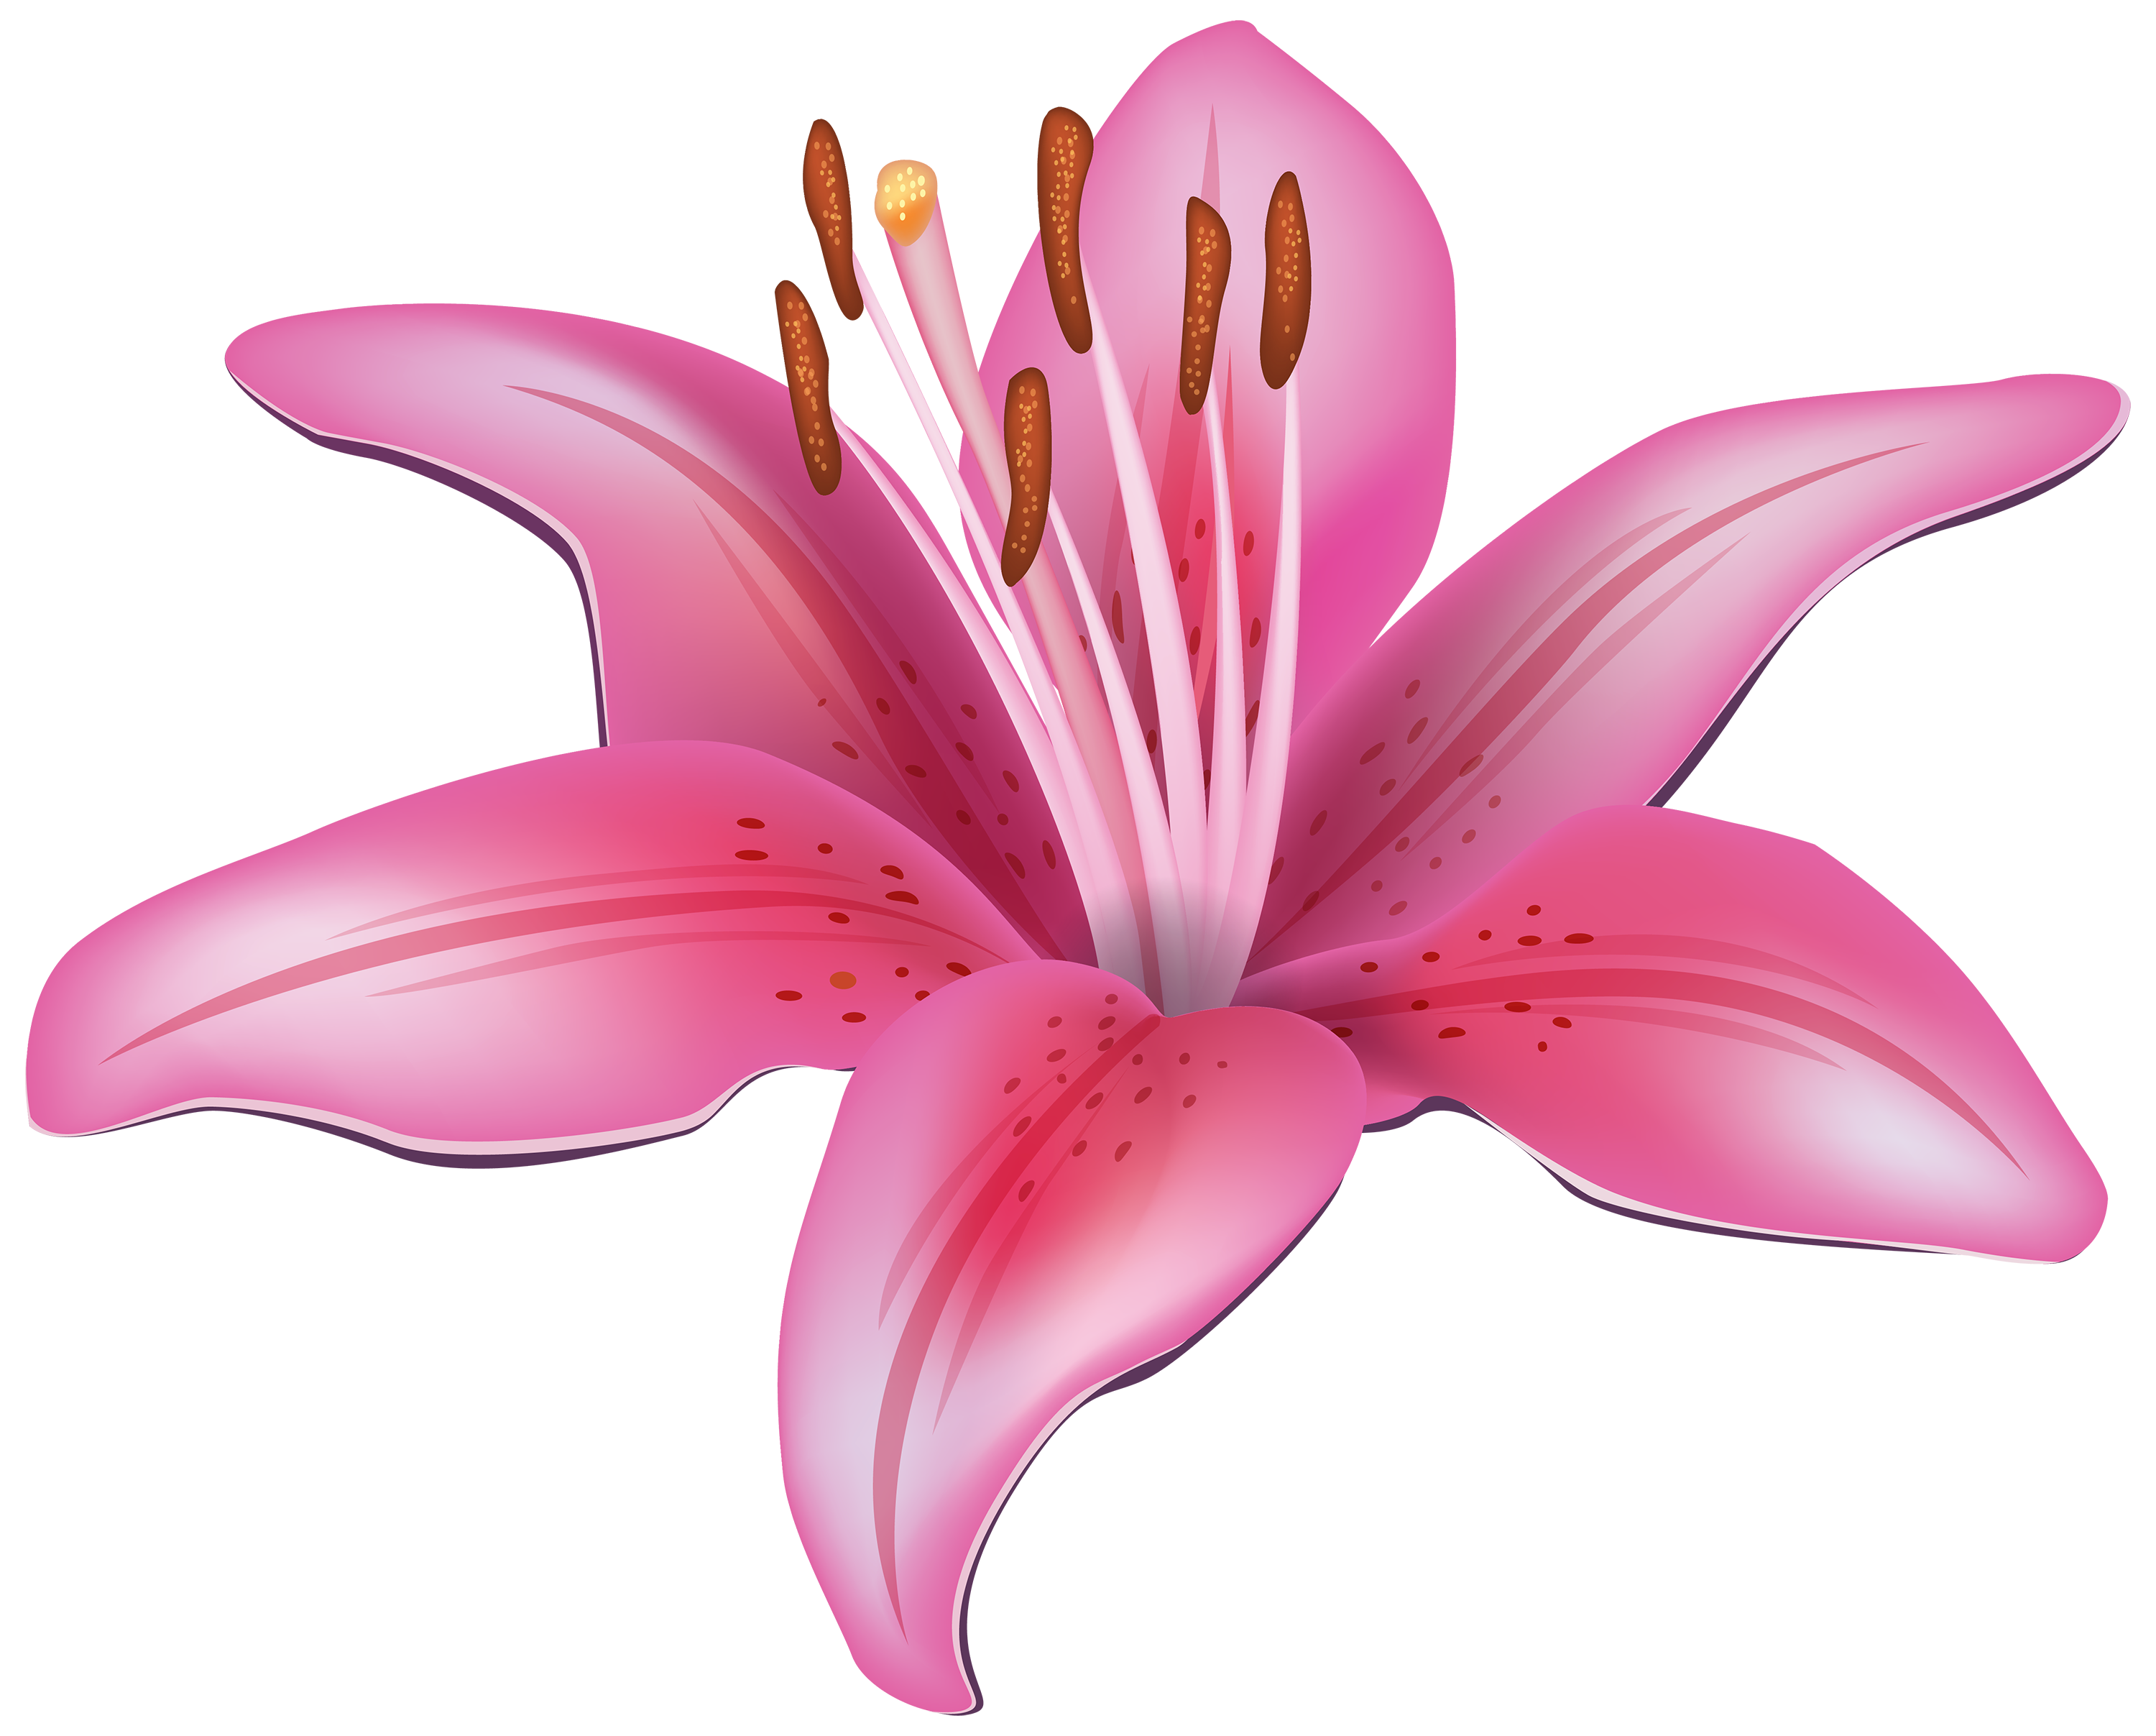 Lily free flower clipart image